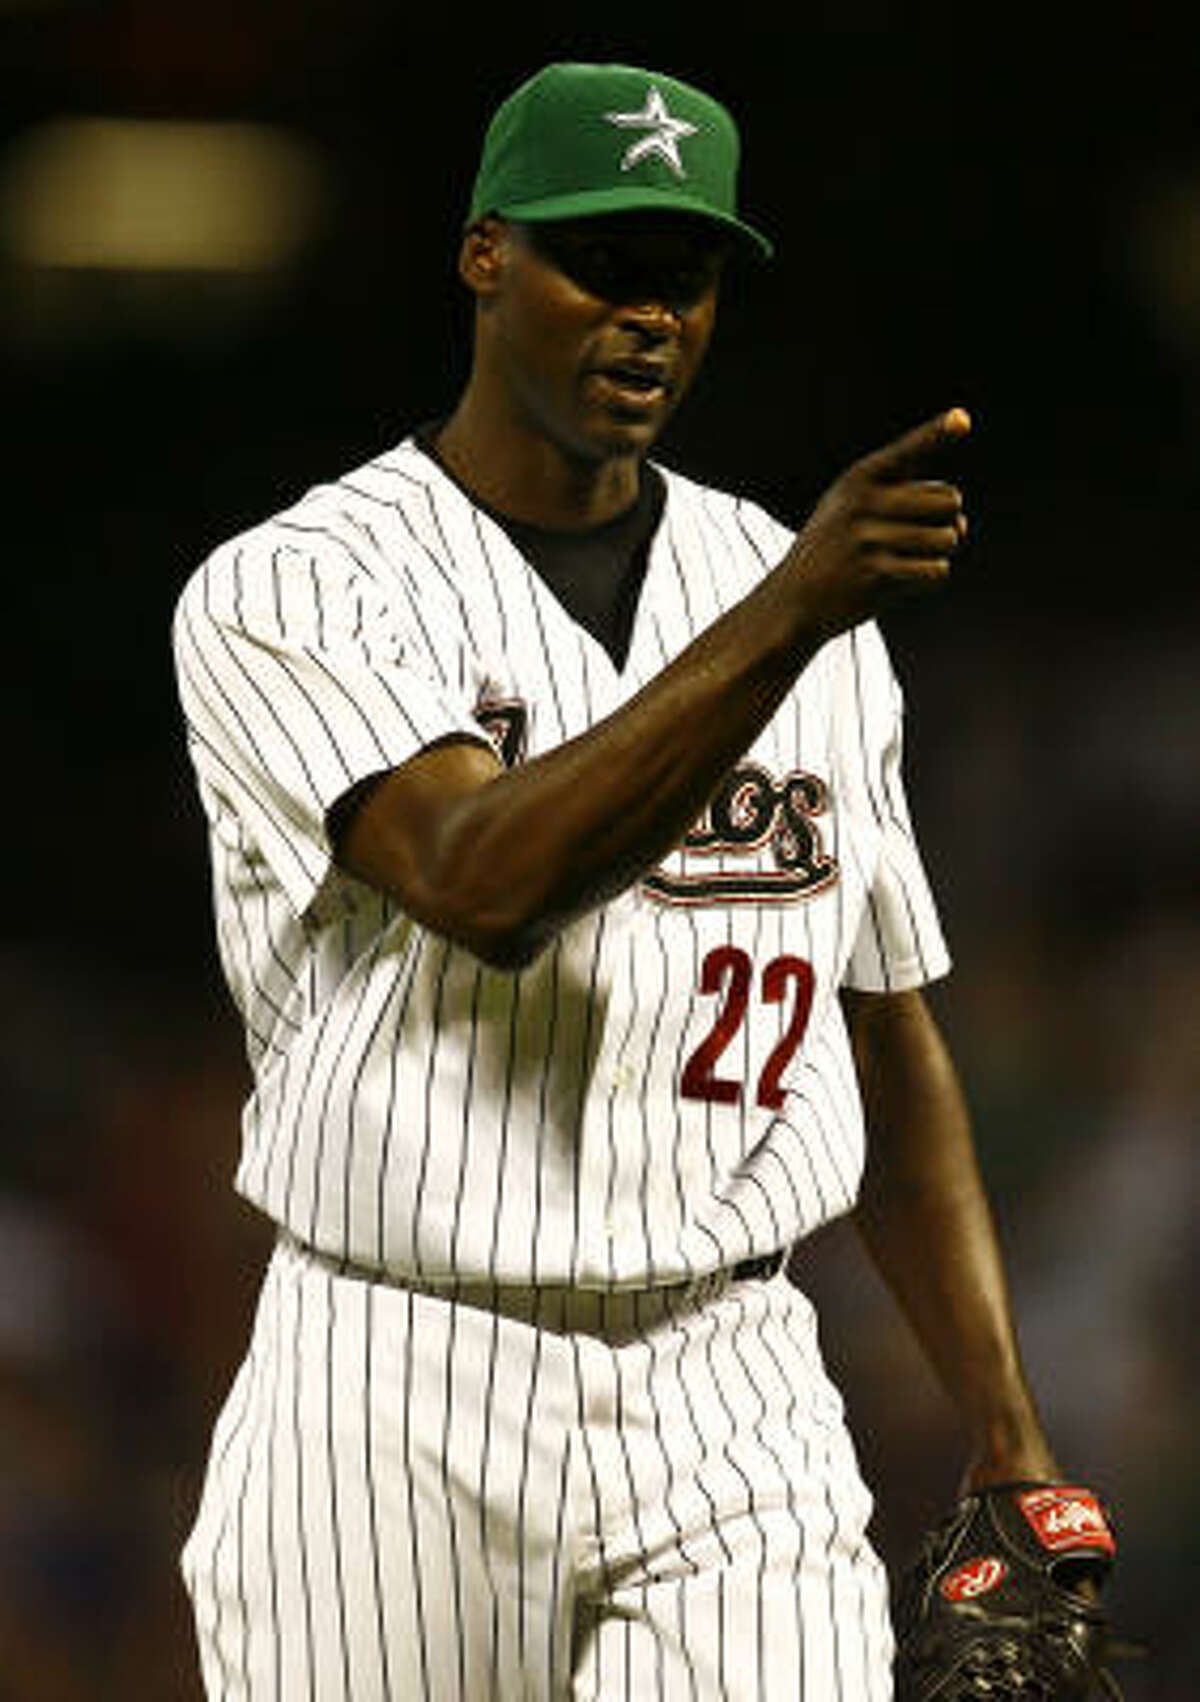 LaTroy Hawkins was a strong ninth-inning option for the Astros last year when Jose Valverde was out.